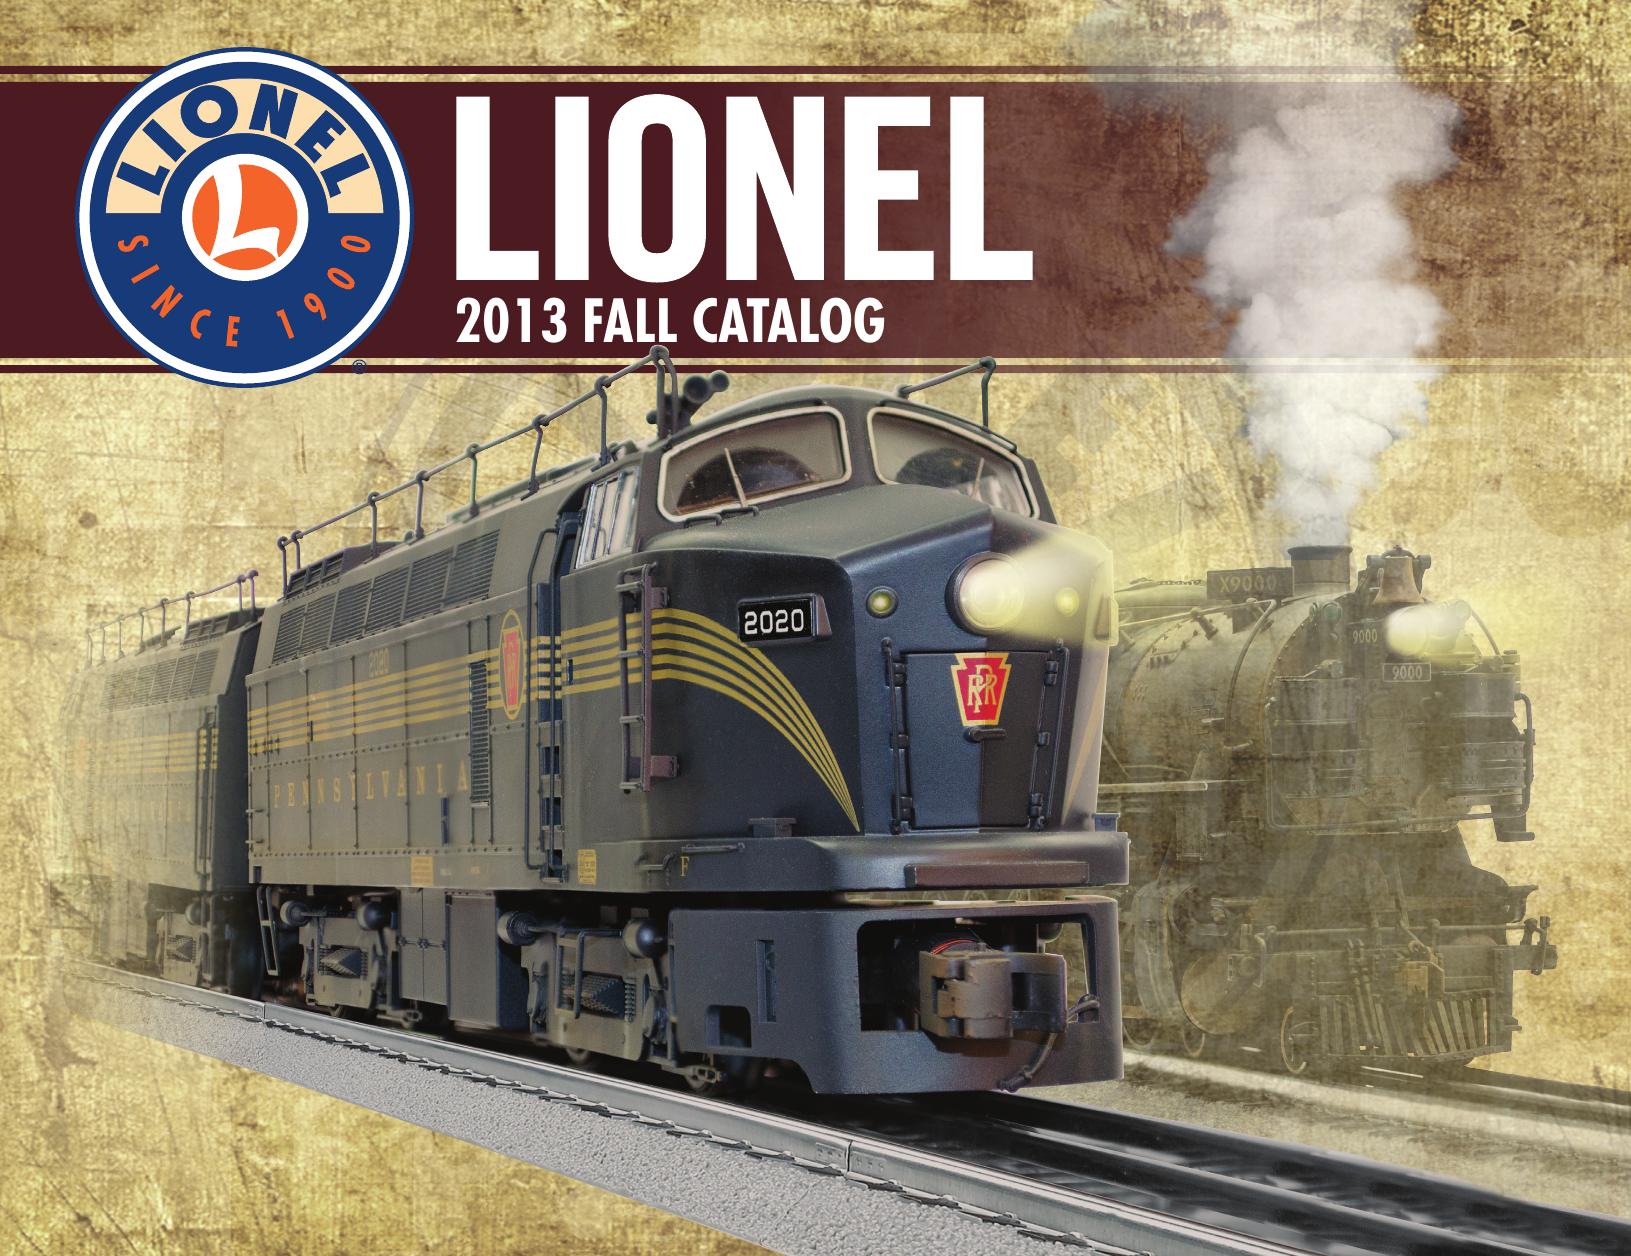 Train Gifts & Collectibles The Lionel Trains Catalog